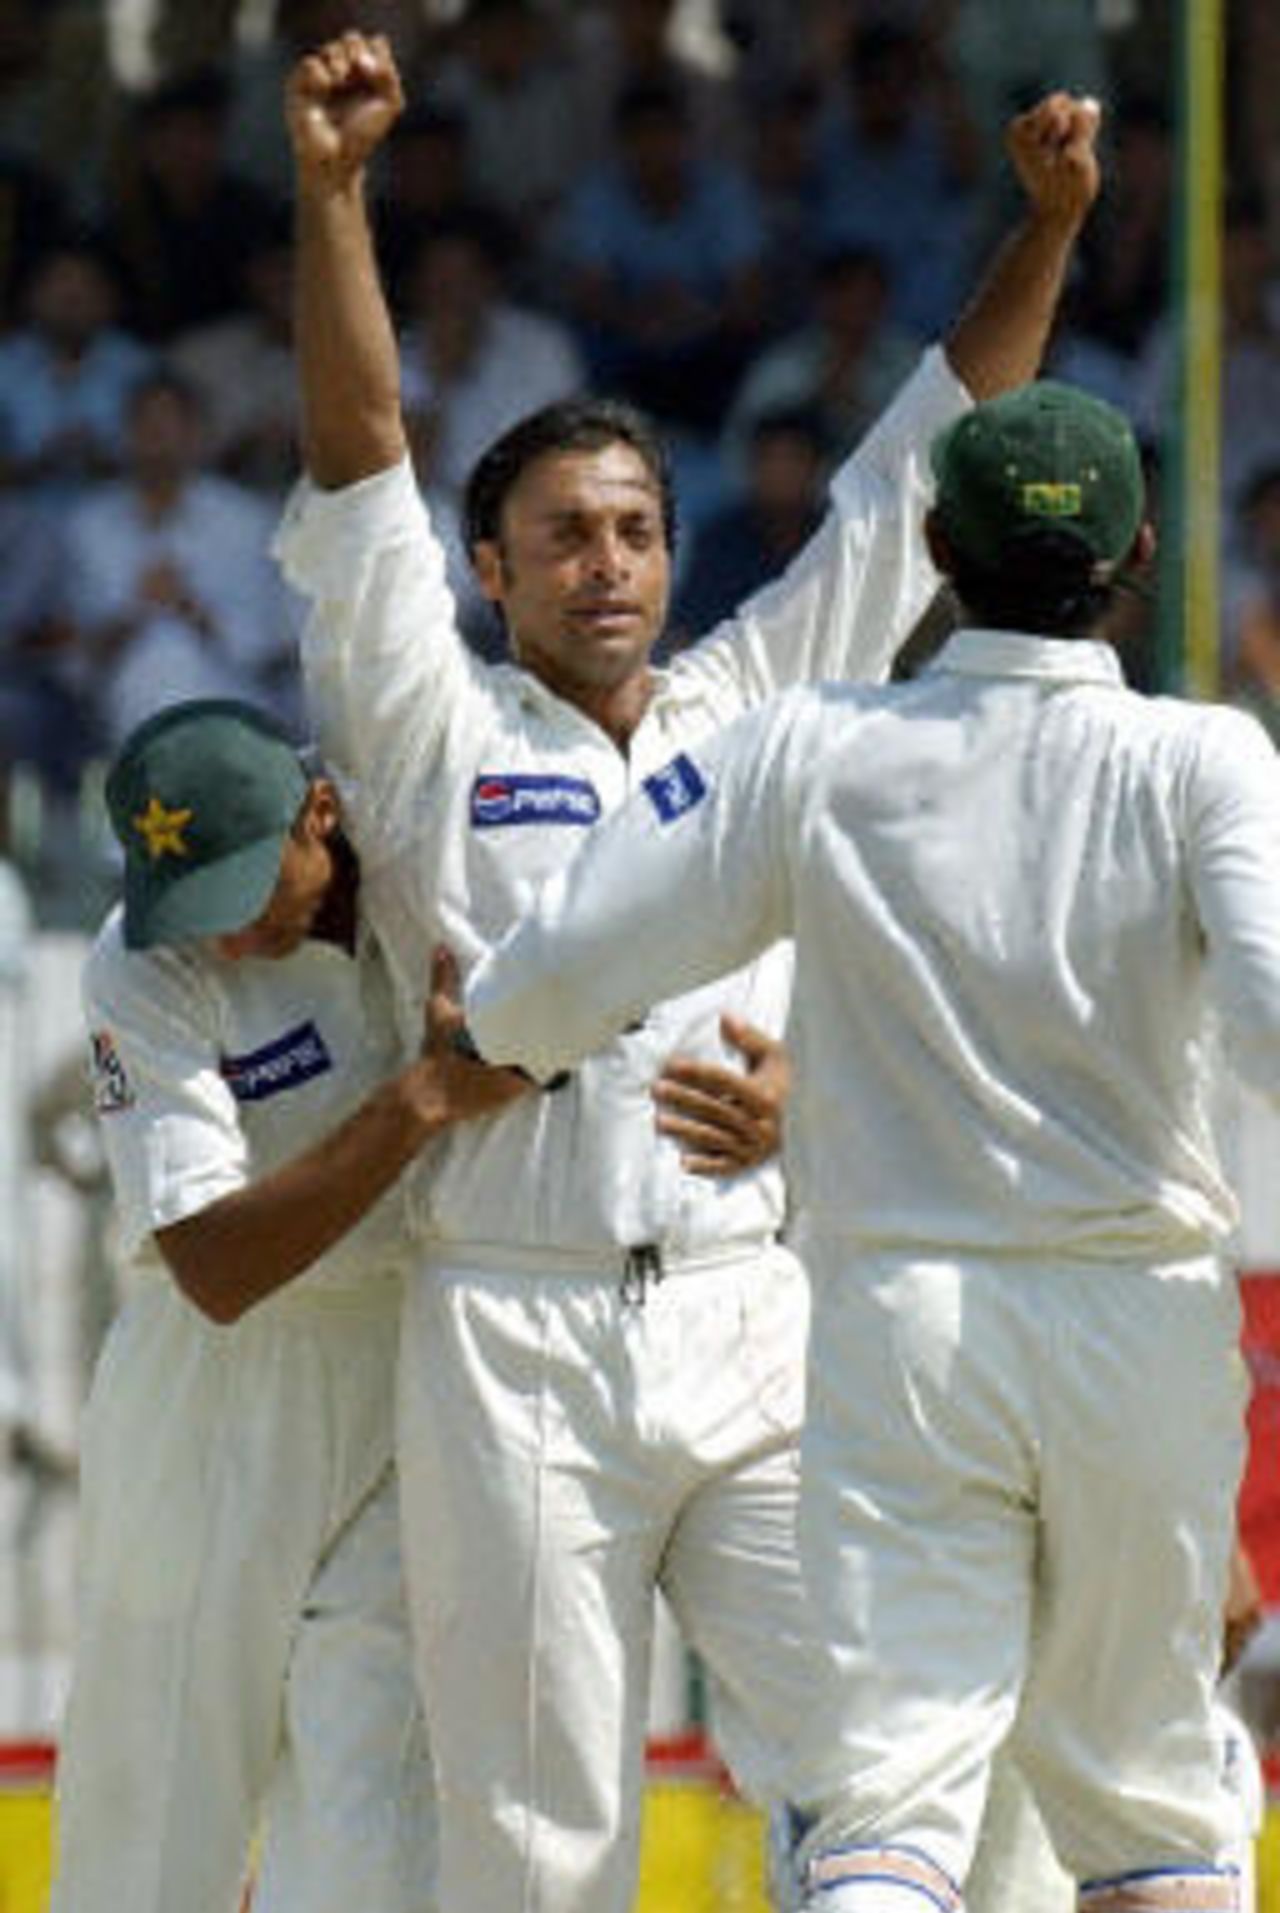 Shoaib Akhtar (C) celebrates taking 100 Test wickets in his 27th Test after dismissing Rajin Saleh (not in the picture) with his teammates during the fourth day of the second Test between Pakistan and Bangladesh in Peshawar, 30 August 2003.